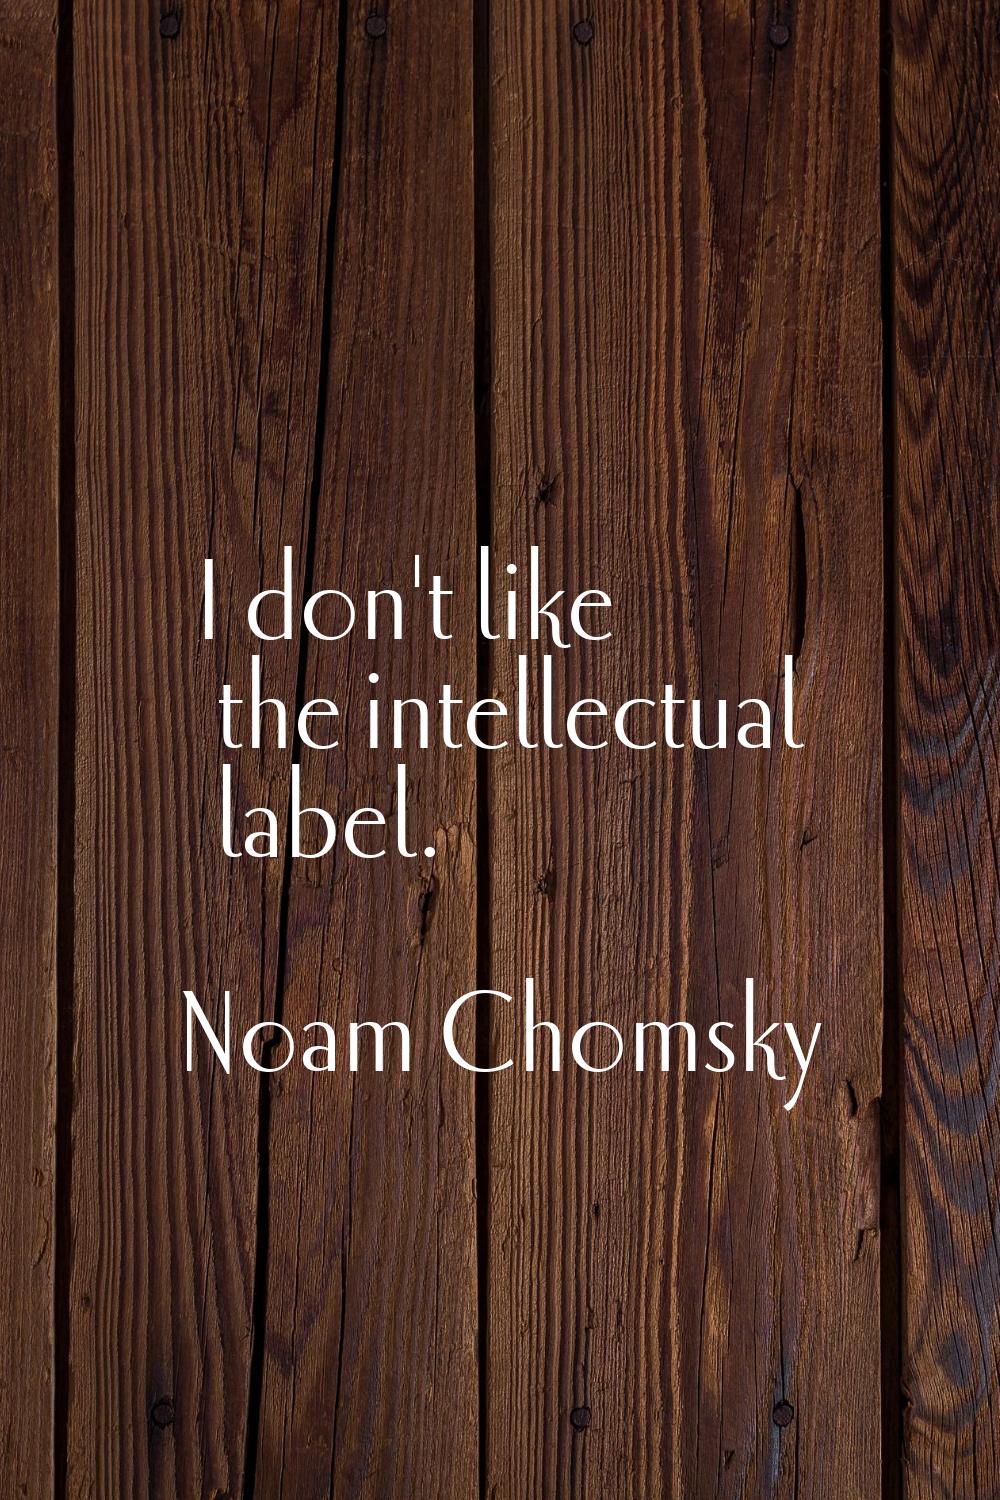 I don't like the intellectual label.